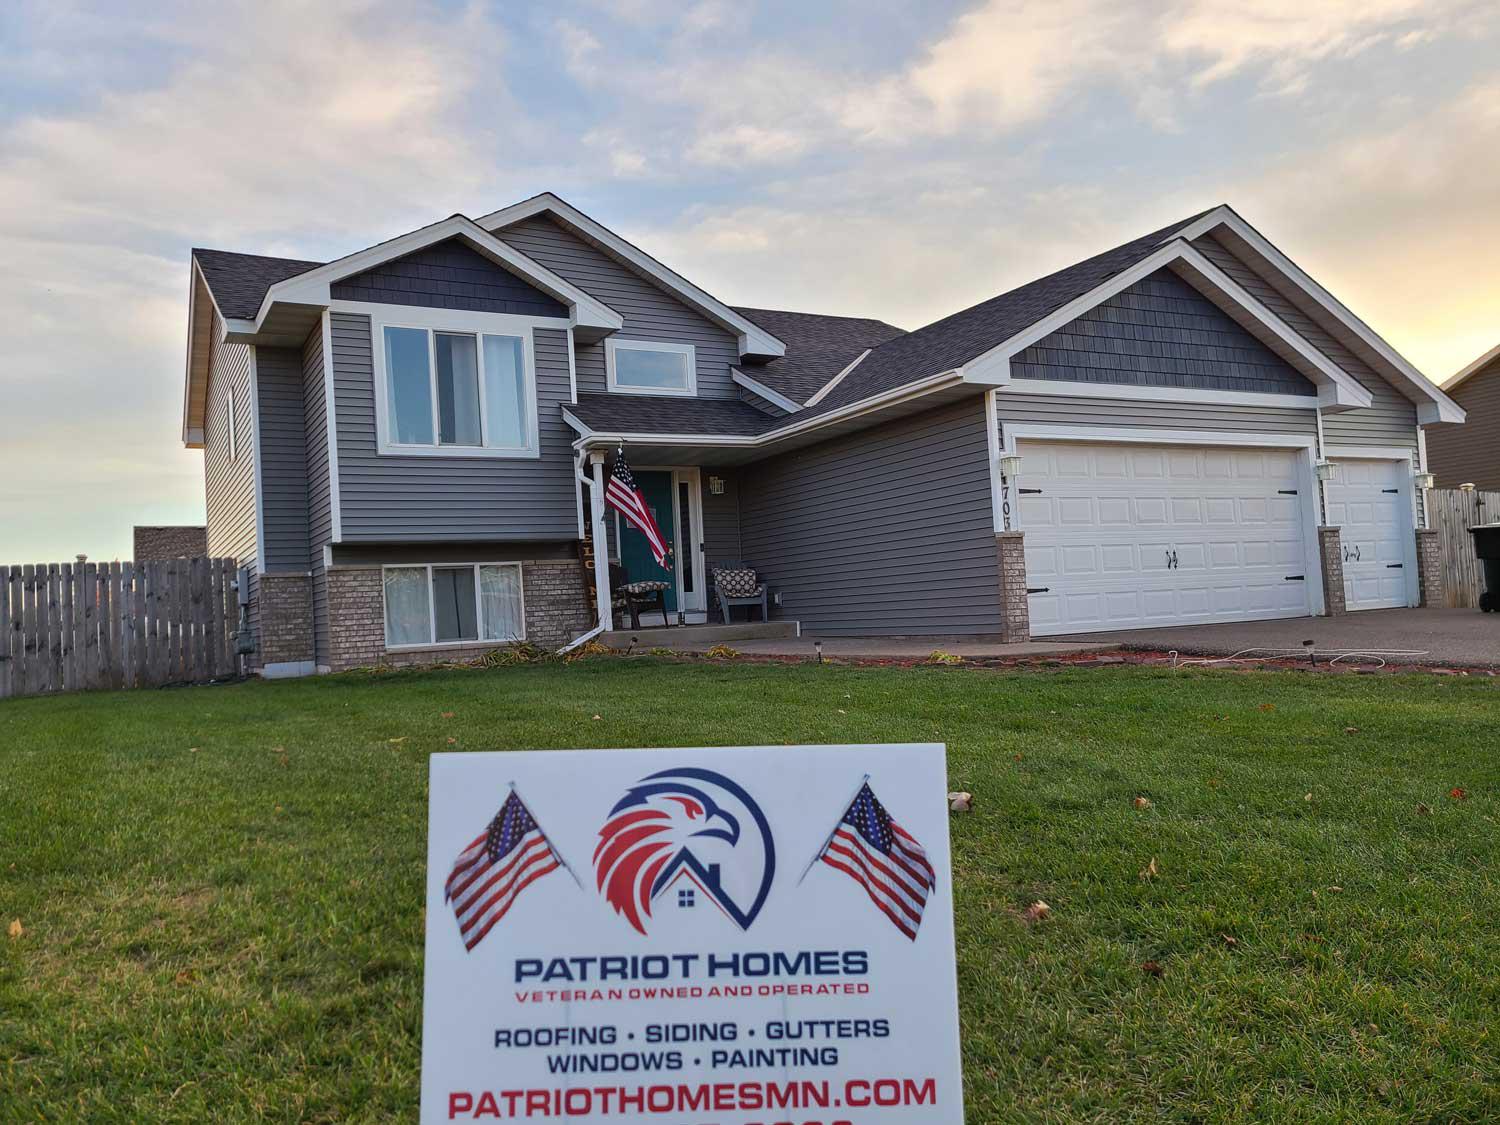 Patriot Homes is Minnesota's roofing expert for all roof replacement, new roof installation, roof repair, siding and gutter needs in central Minnesota. Call or click today to schedule a free estimate!